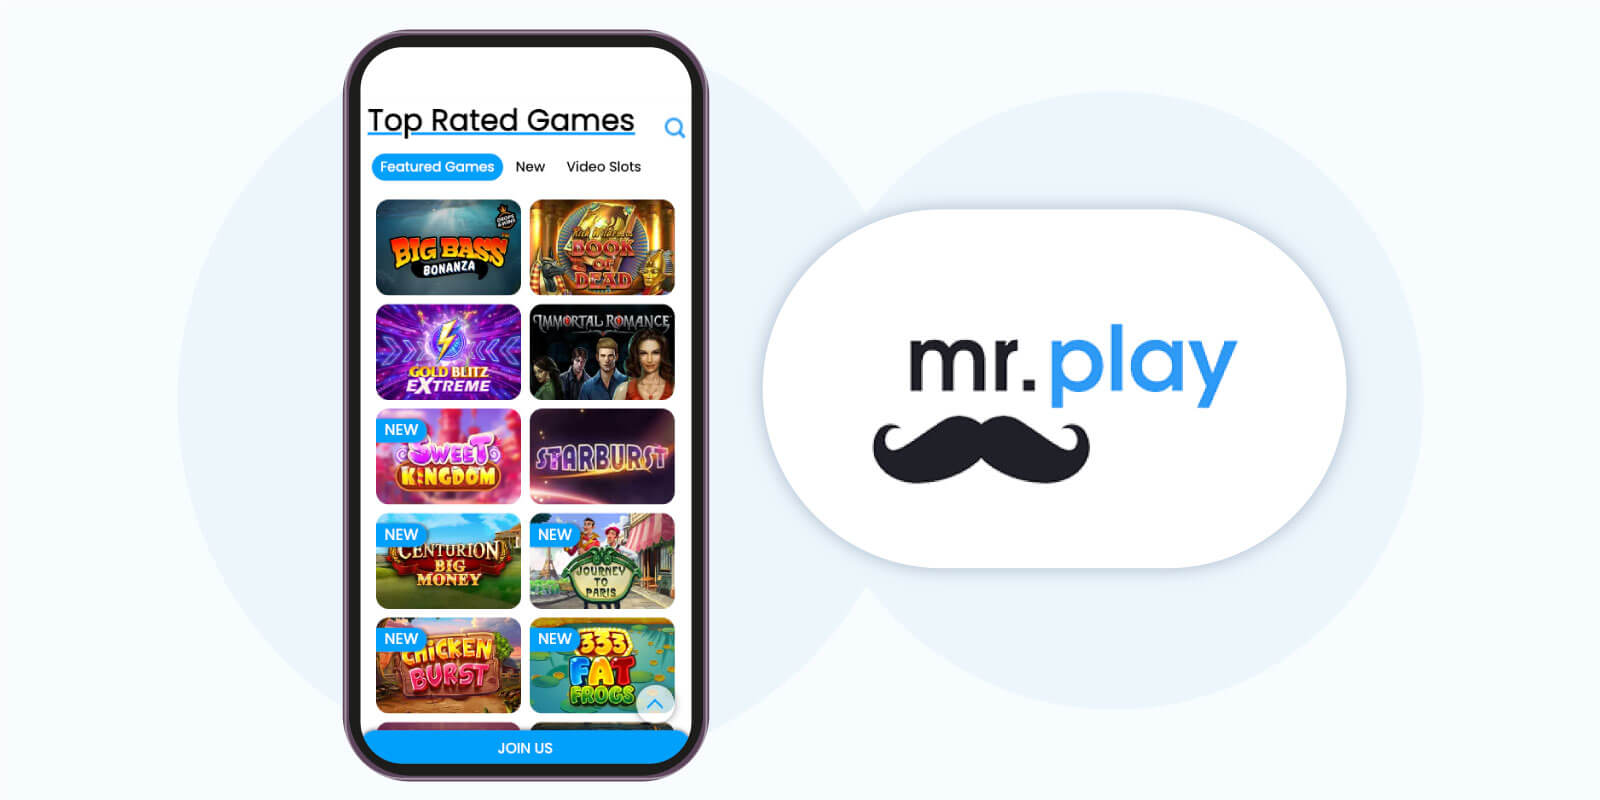 mr.play Casino - Best Mobile Casino App for Microgaming Slots